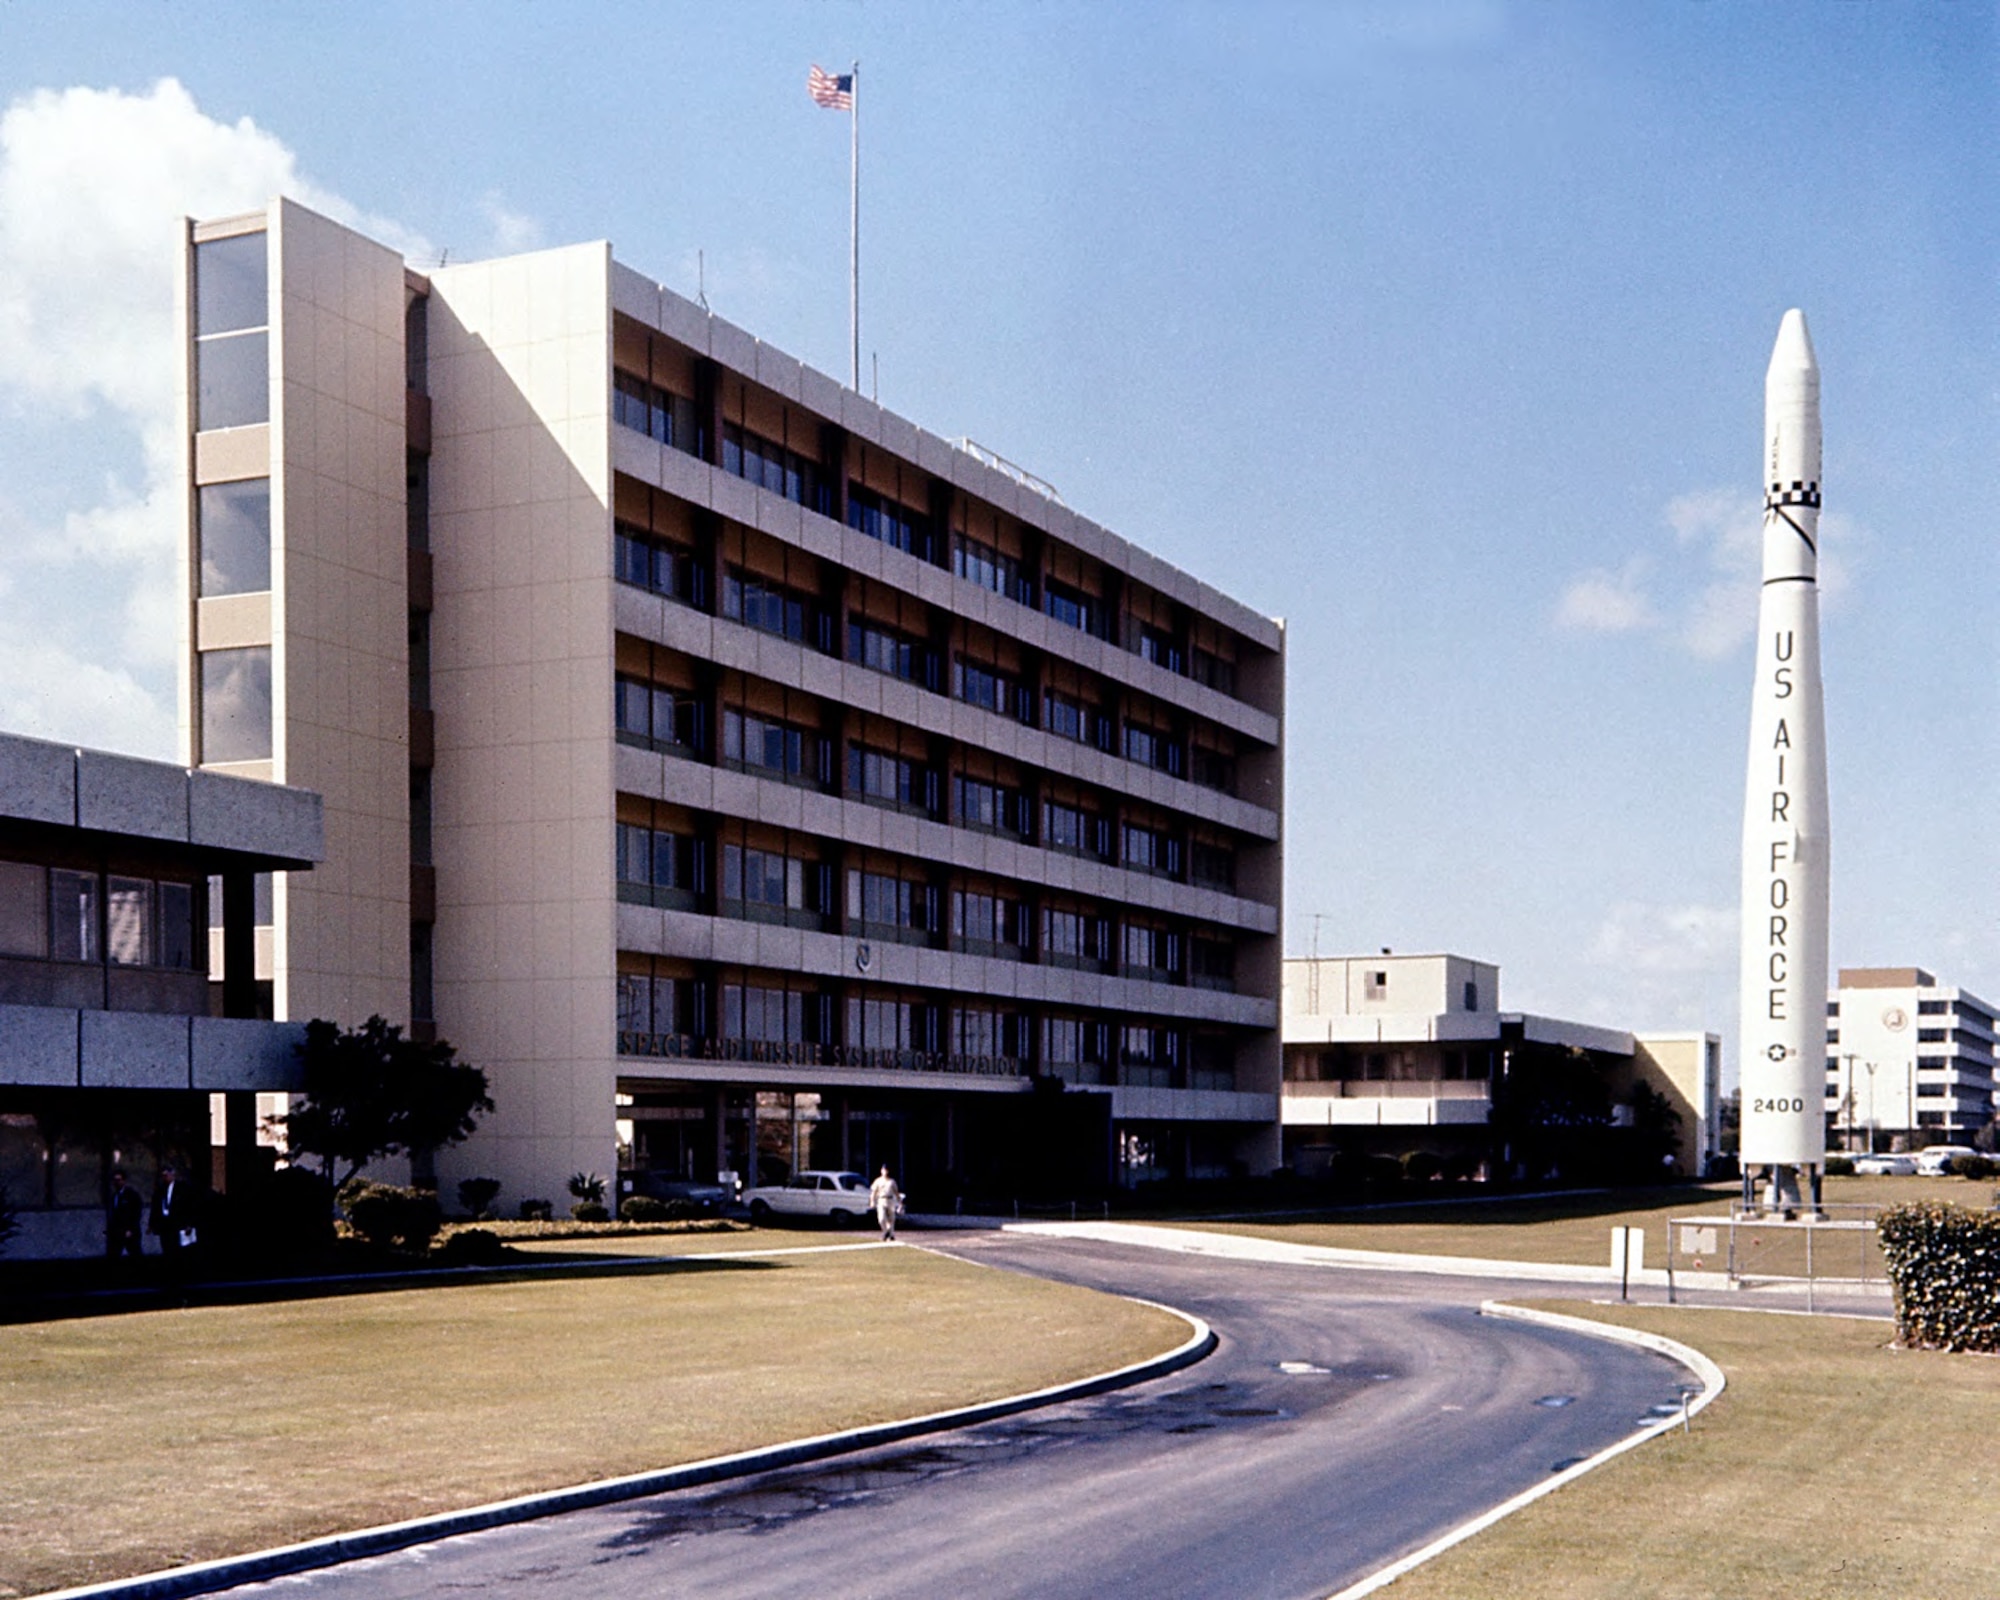 The Thor-Agena monument stands in front of Bldg. 105, headquarters of Space Systems Division in Area A of Los Angeles Air Force Station in February 1967. (U.S. Air Force photo)